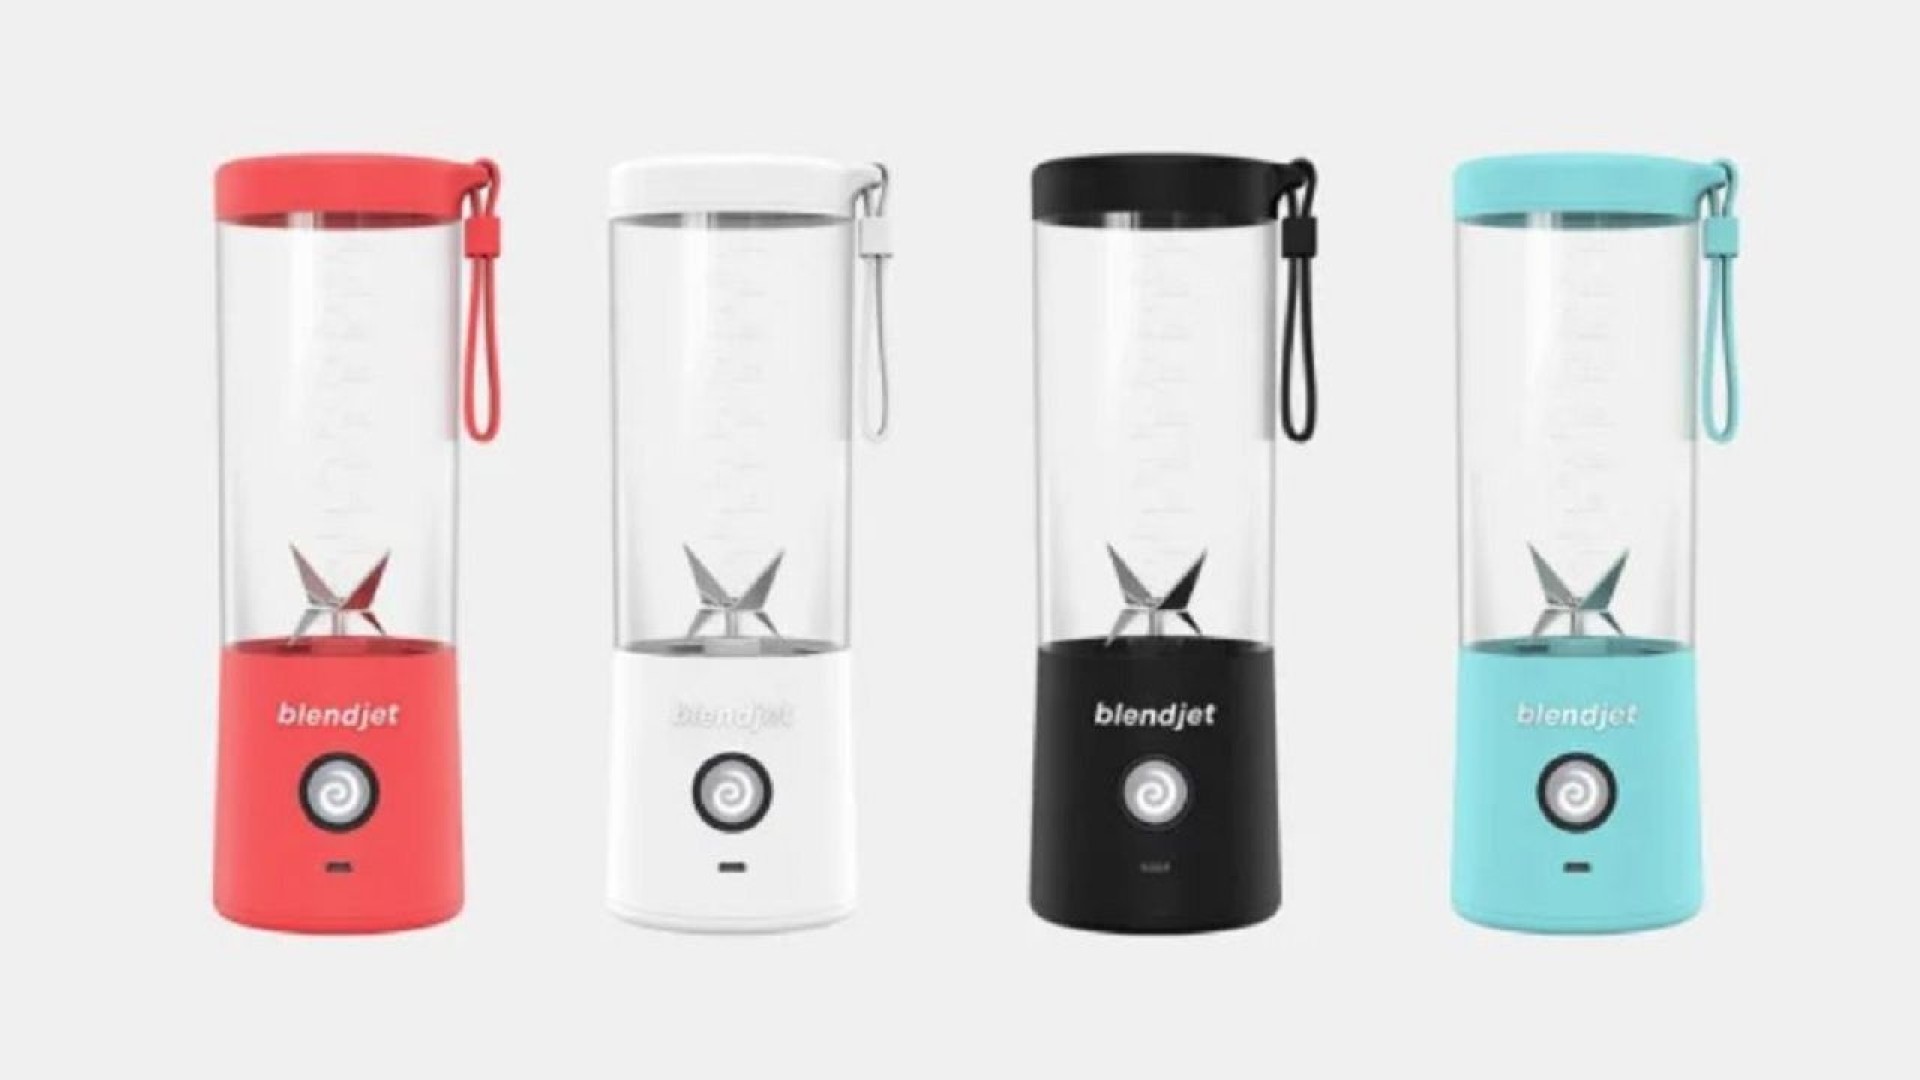 Popular BlendJet 2 portable blender recalled following safety issues raised  by Consumer Reports